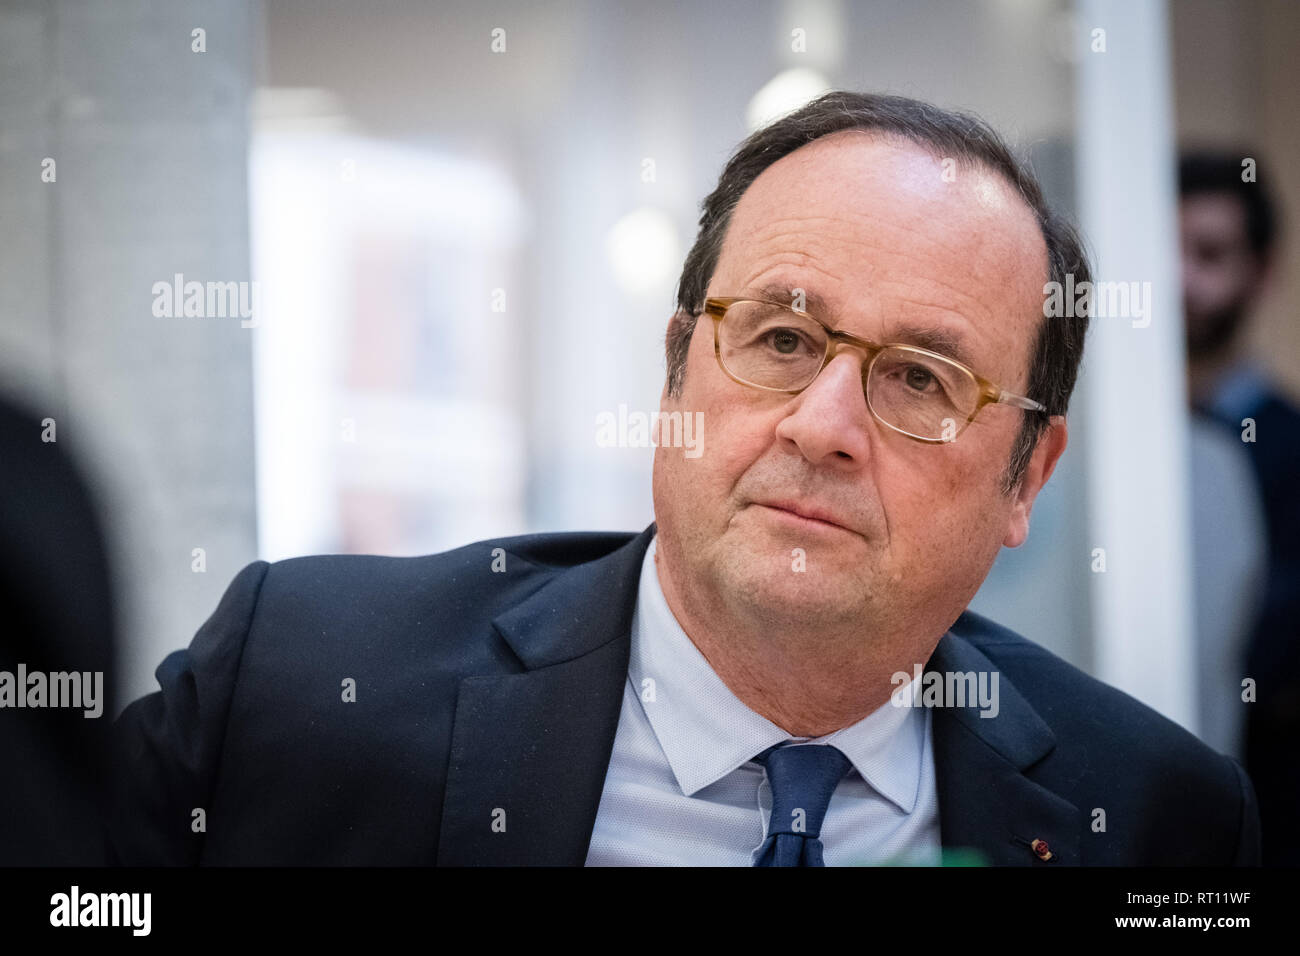 François Hollande former president of the French Republic Stock Photo